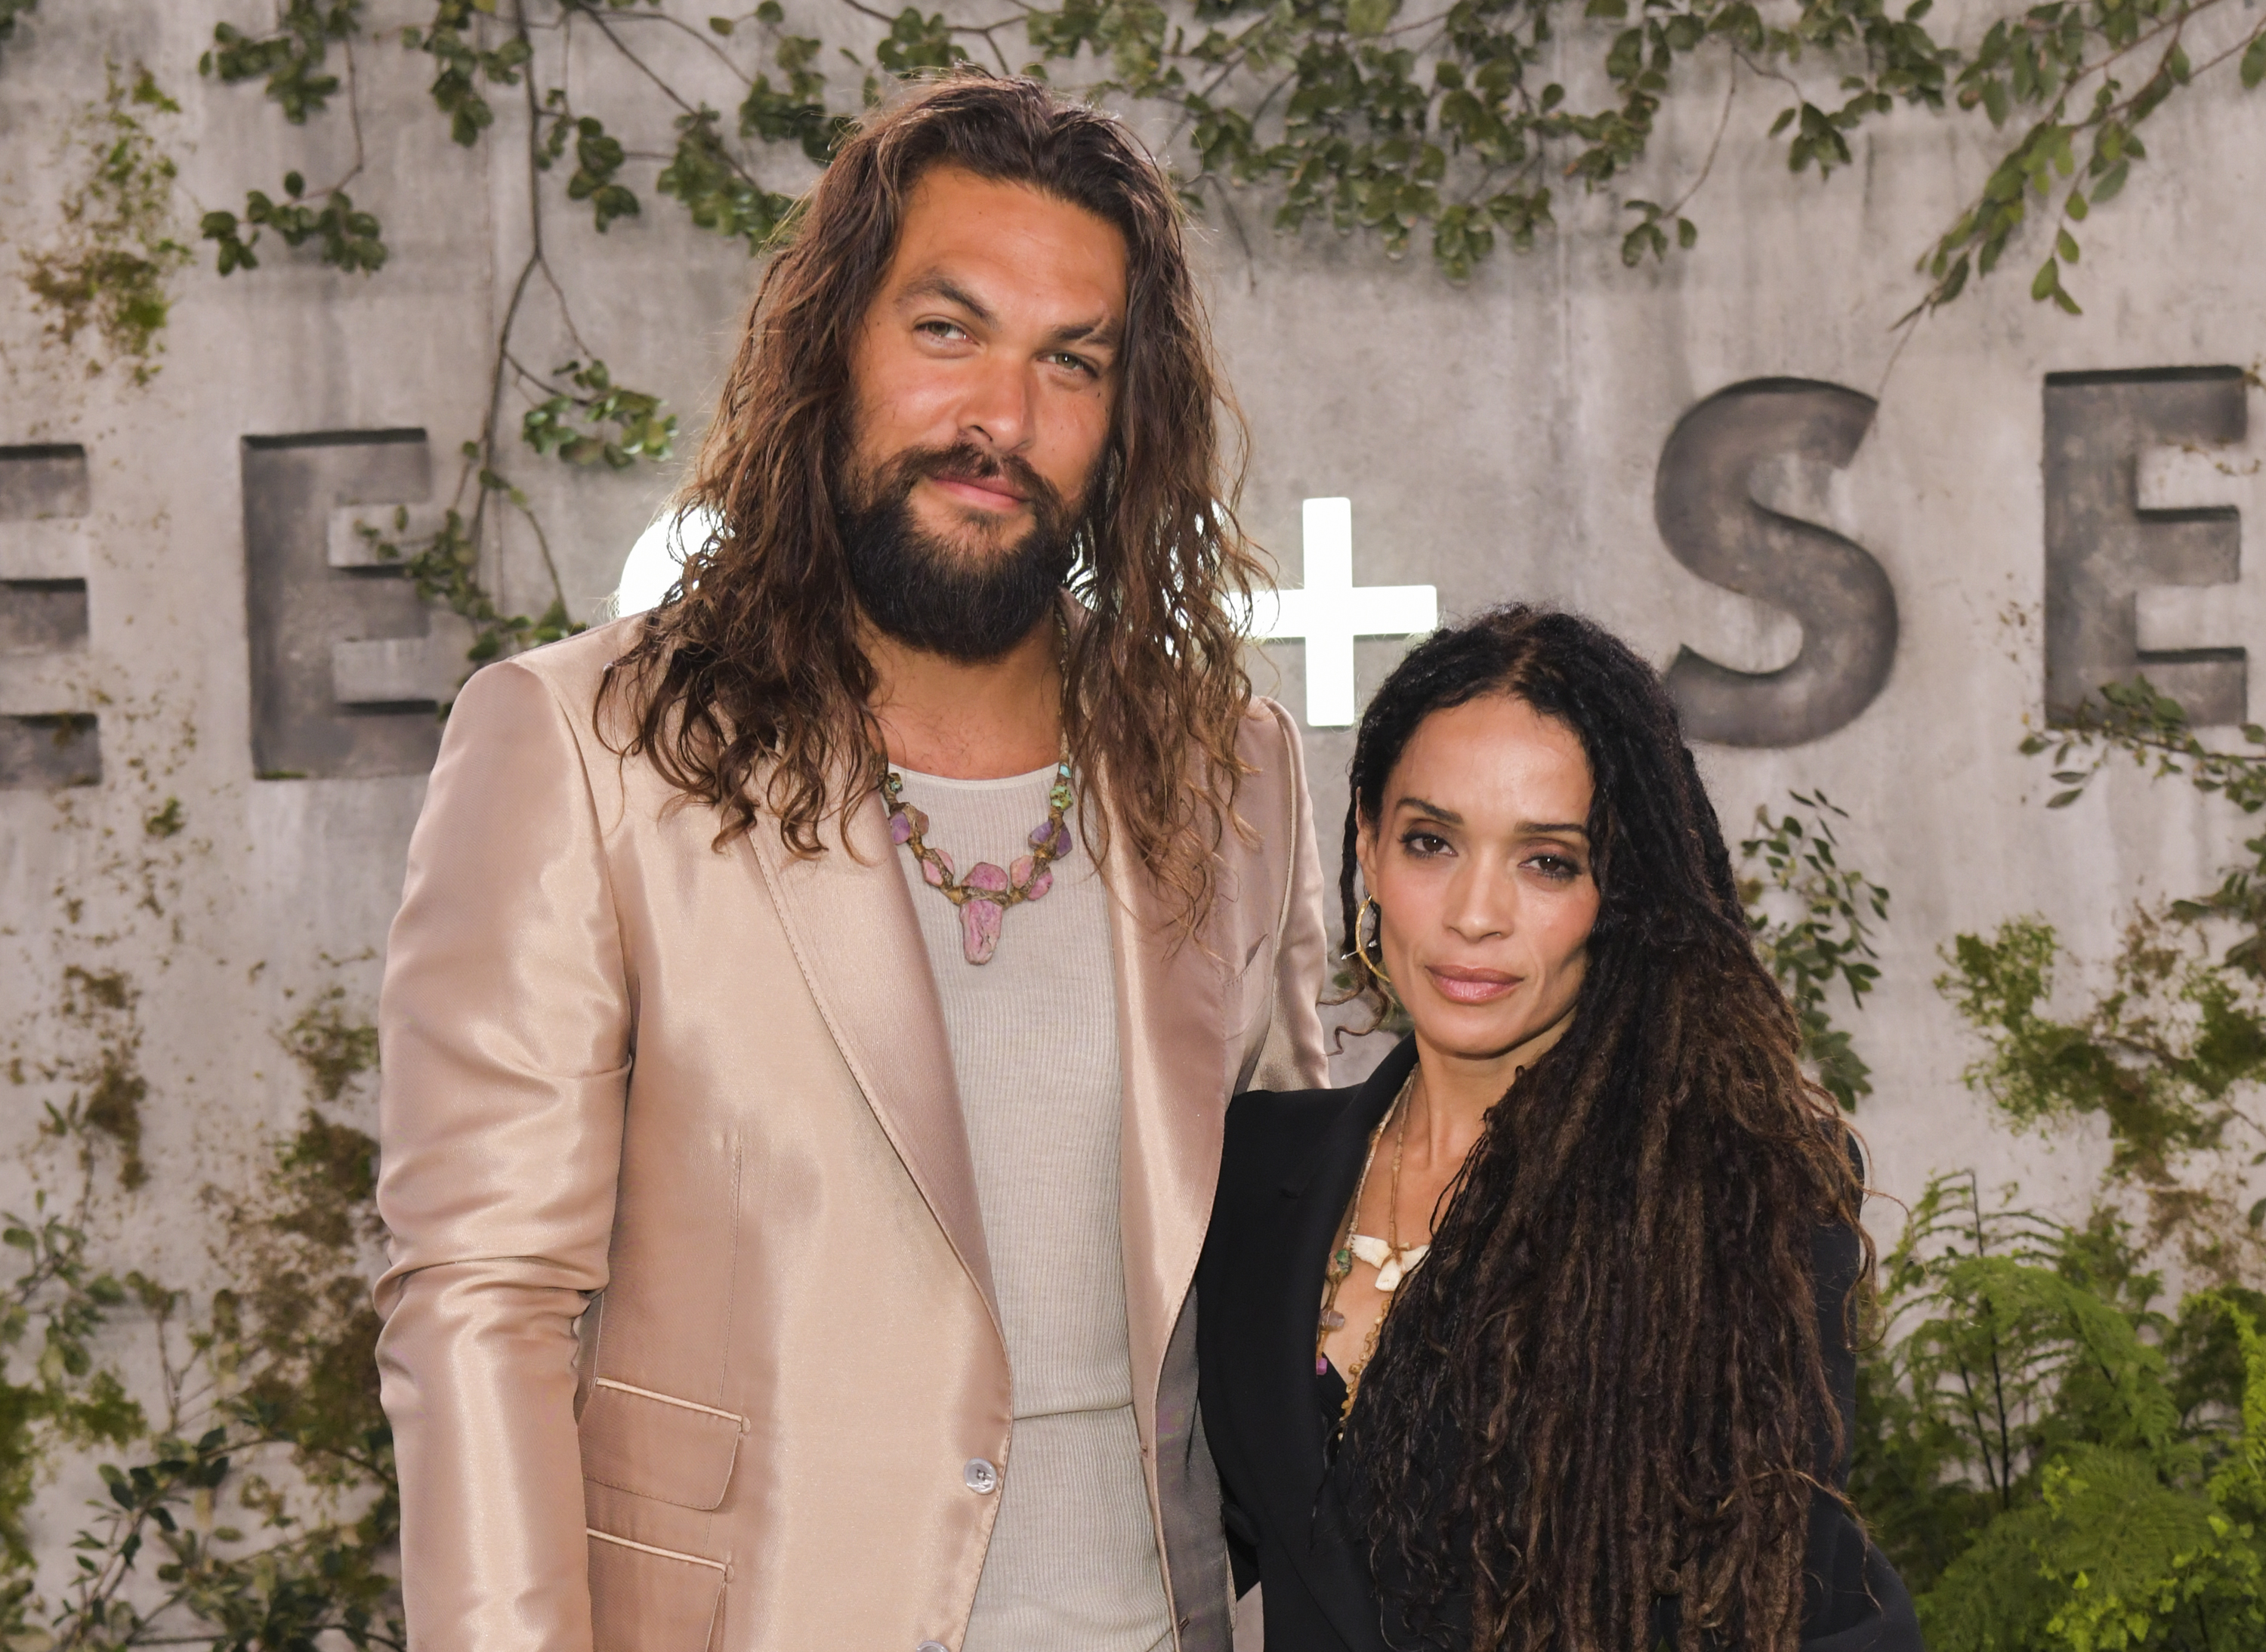 Jason Momoa and Lisa Bonet attend the premiere of Apple TV+'s "See" on October 21, 2019 in Los Angeles, California | Source: Getty Images